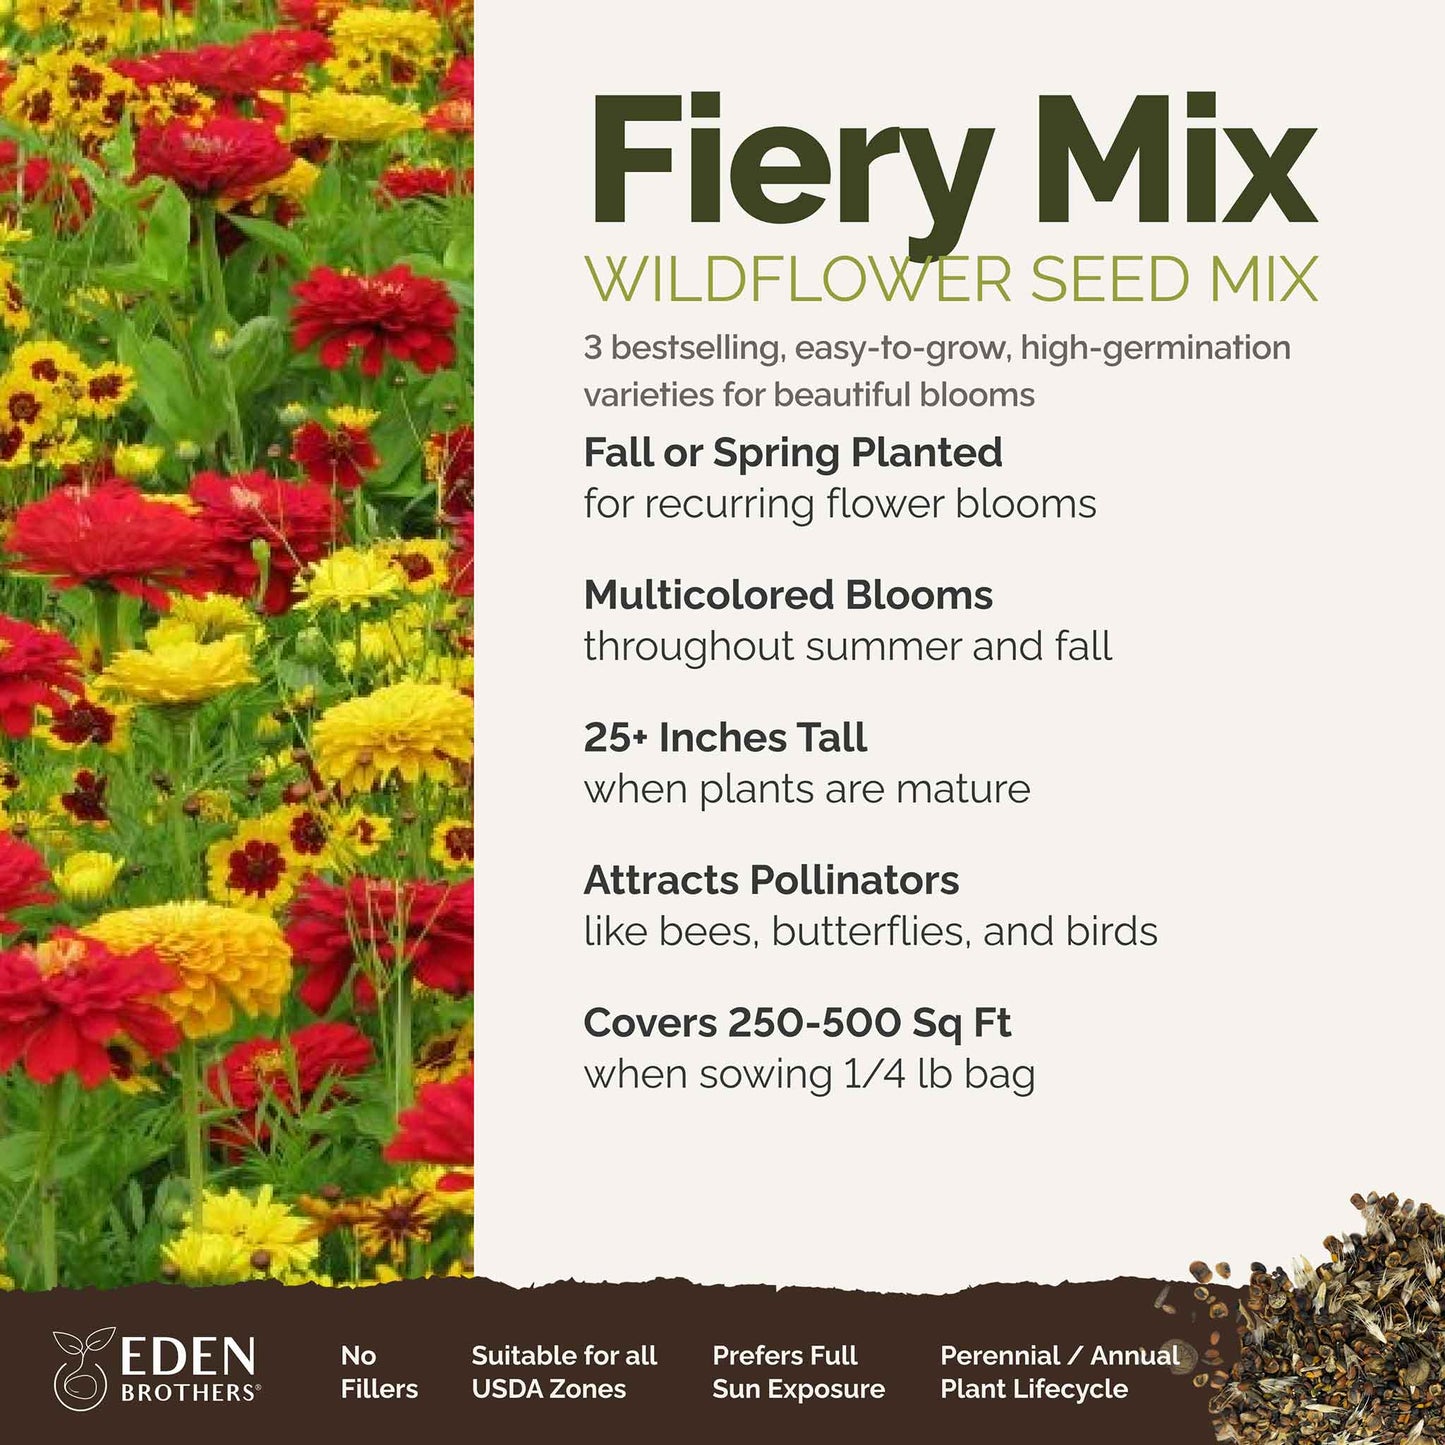 fiery mix overview